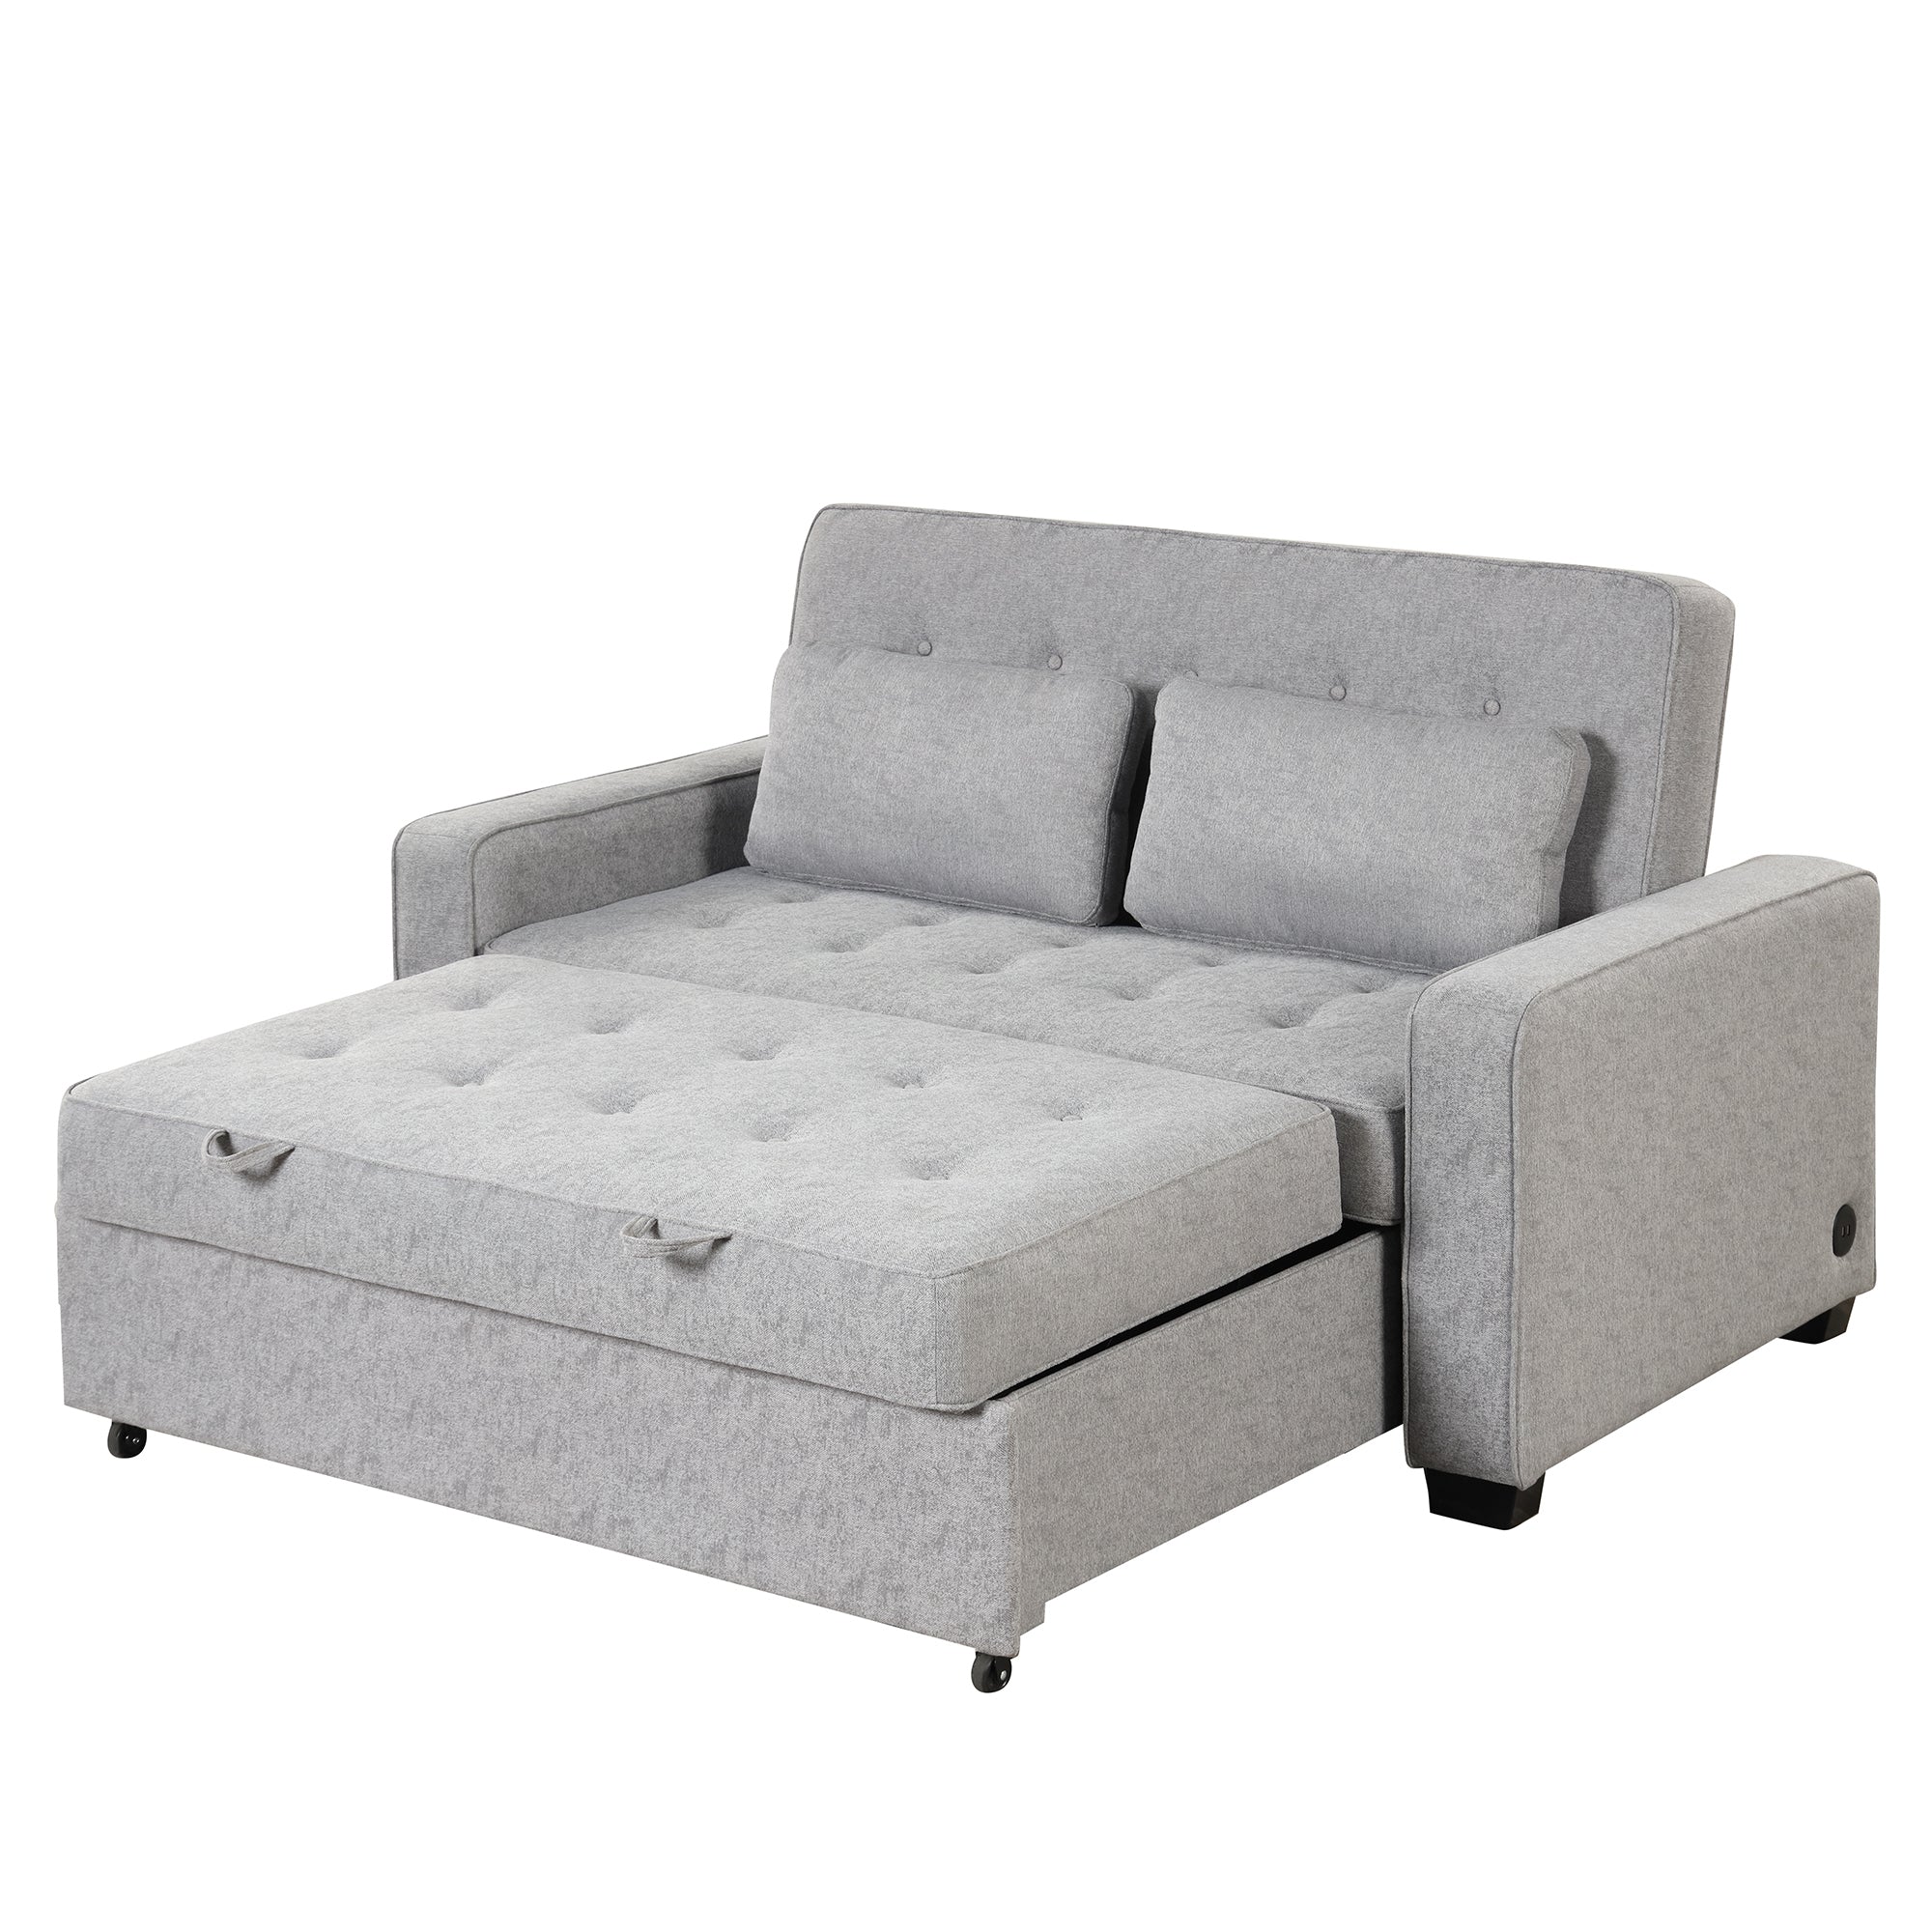 65.7" Linen Upholstered Sleeper Bed , Pull Out Sofa Bed Couch attached